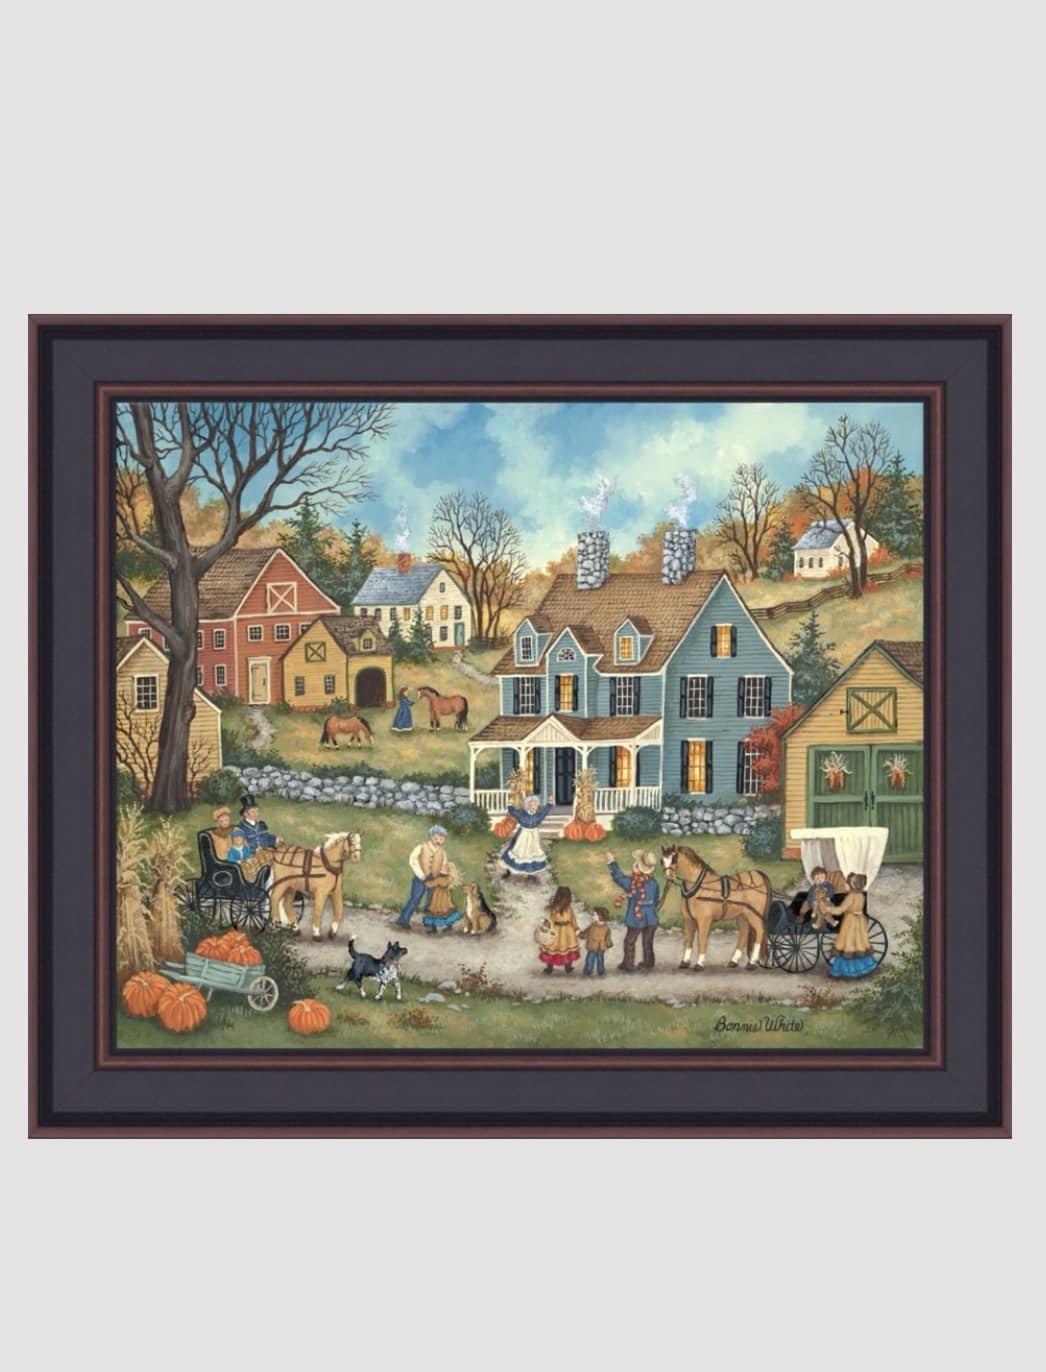 Bonnie White Thanksgiving Day Visitor Print by Bonnie White Brand: Bonnie White